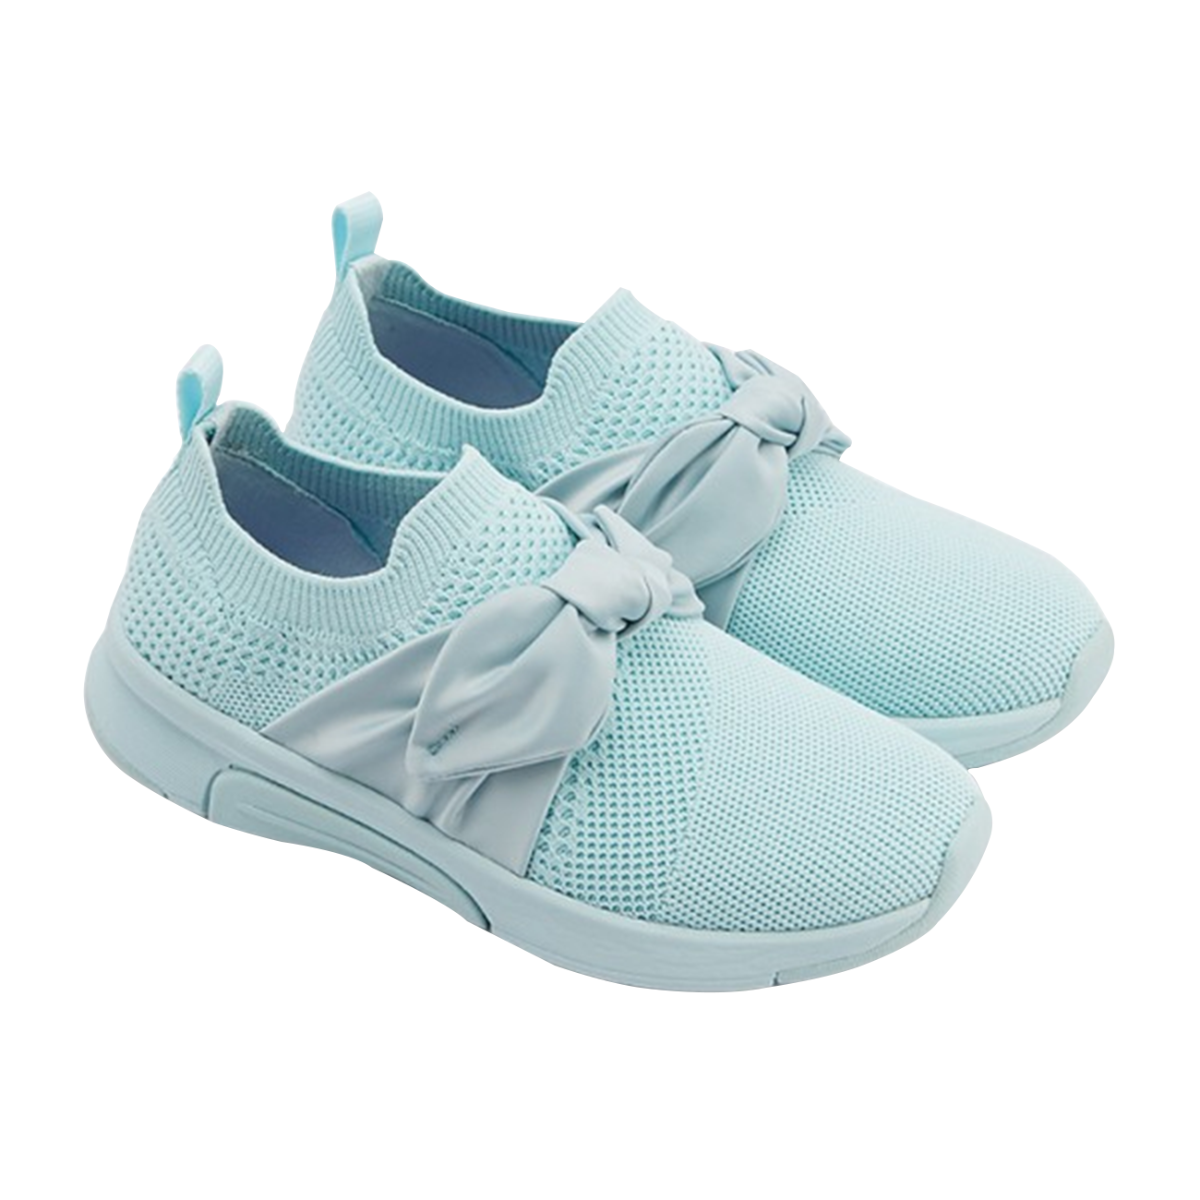 Lifestyle Modern Jogger Shoes